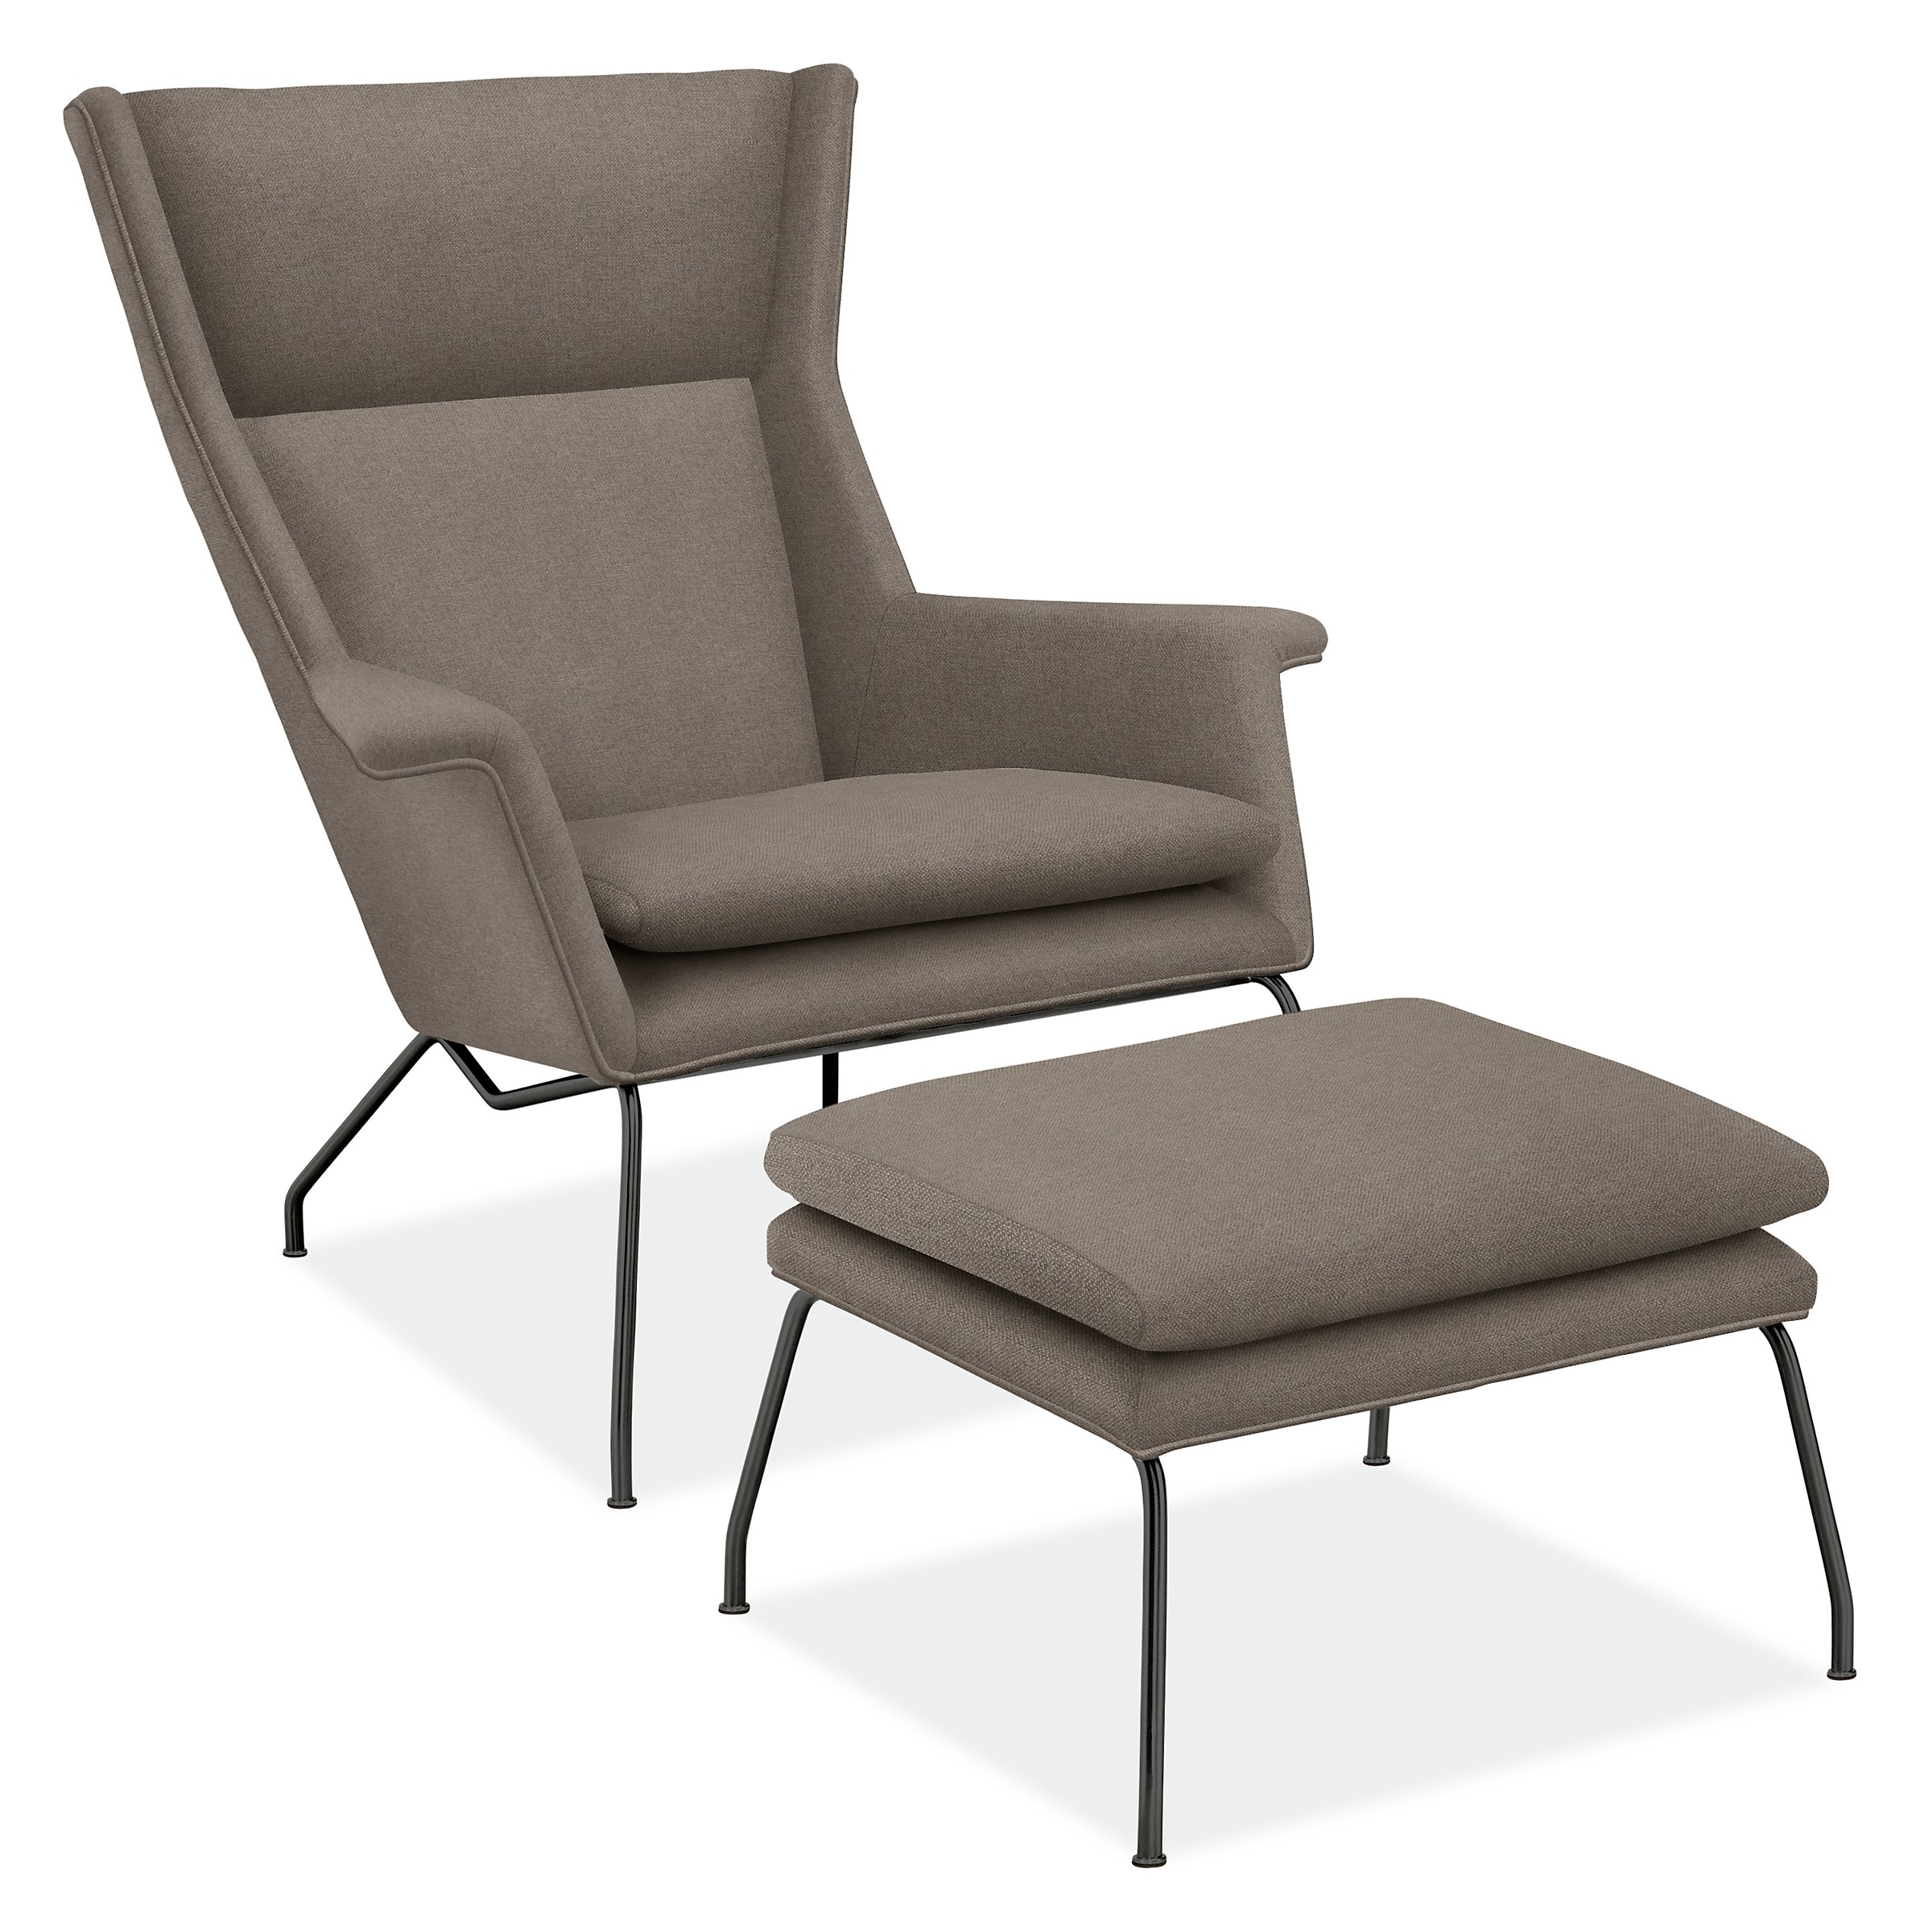 Angle  view of Aidan Chair and Ottoman in Tatum Fog with Natural Steel base.